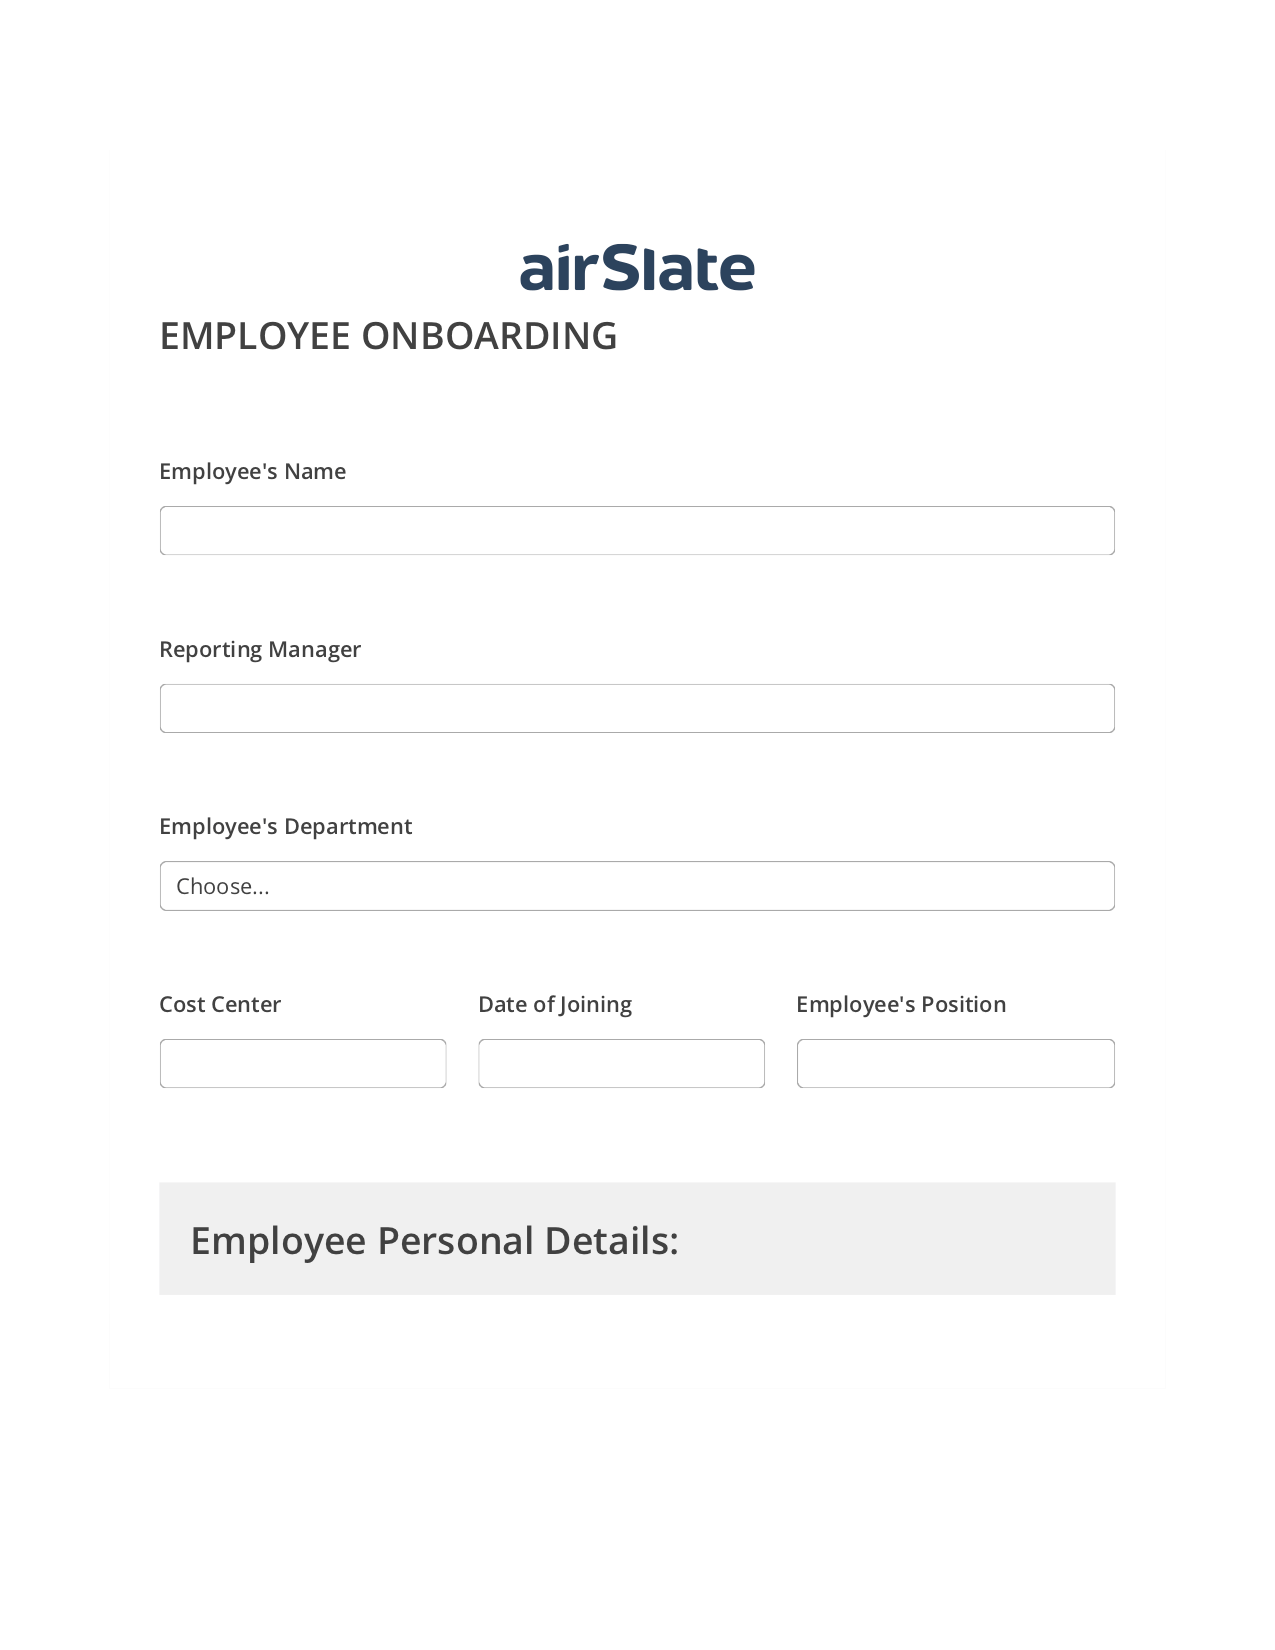 Employee Onboarding Workflow Pre-fill Slate from MS Dynamics 365 record, Update NetSuite Record Bot, Export to NetSuite Bot